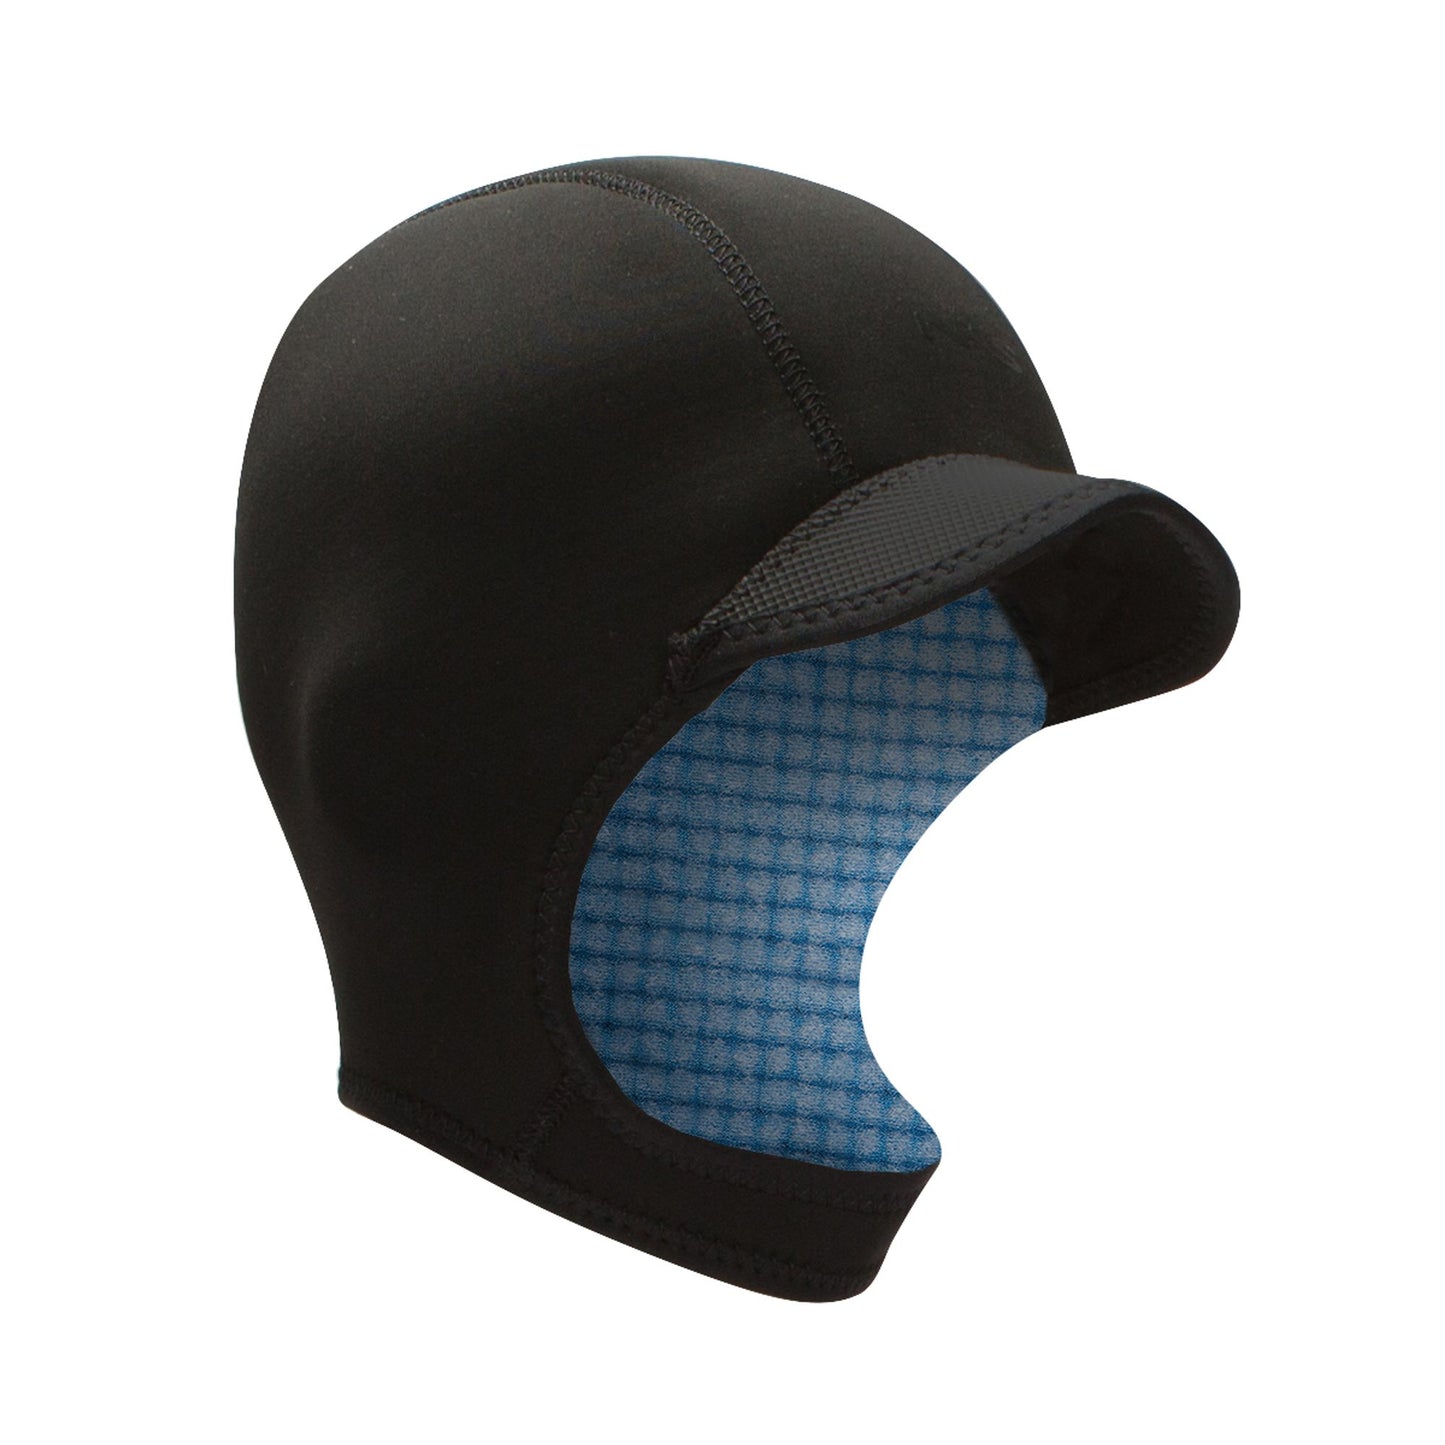 A Storm Cap by NRS providing thermal protection on a white background.